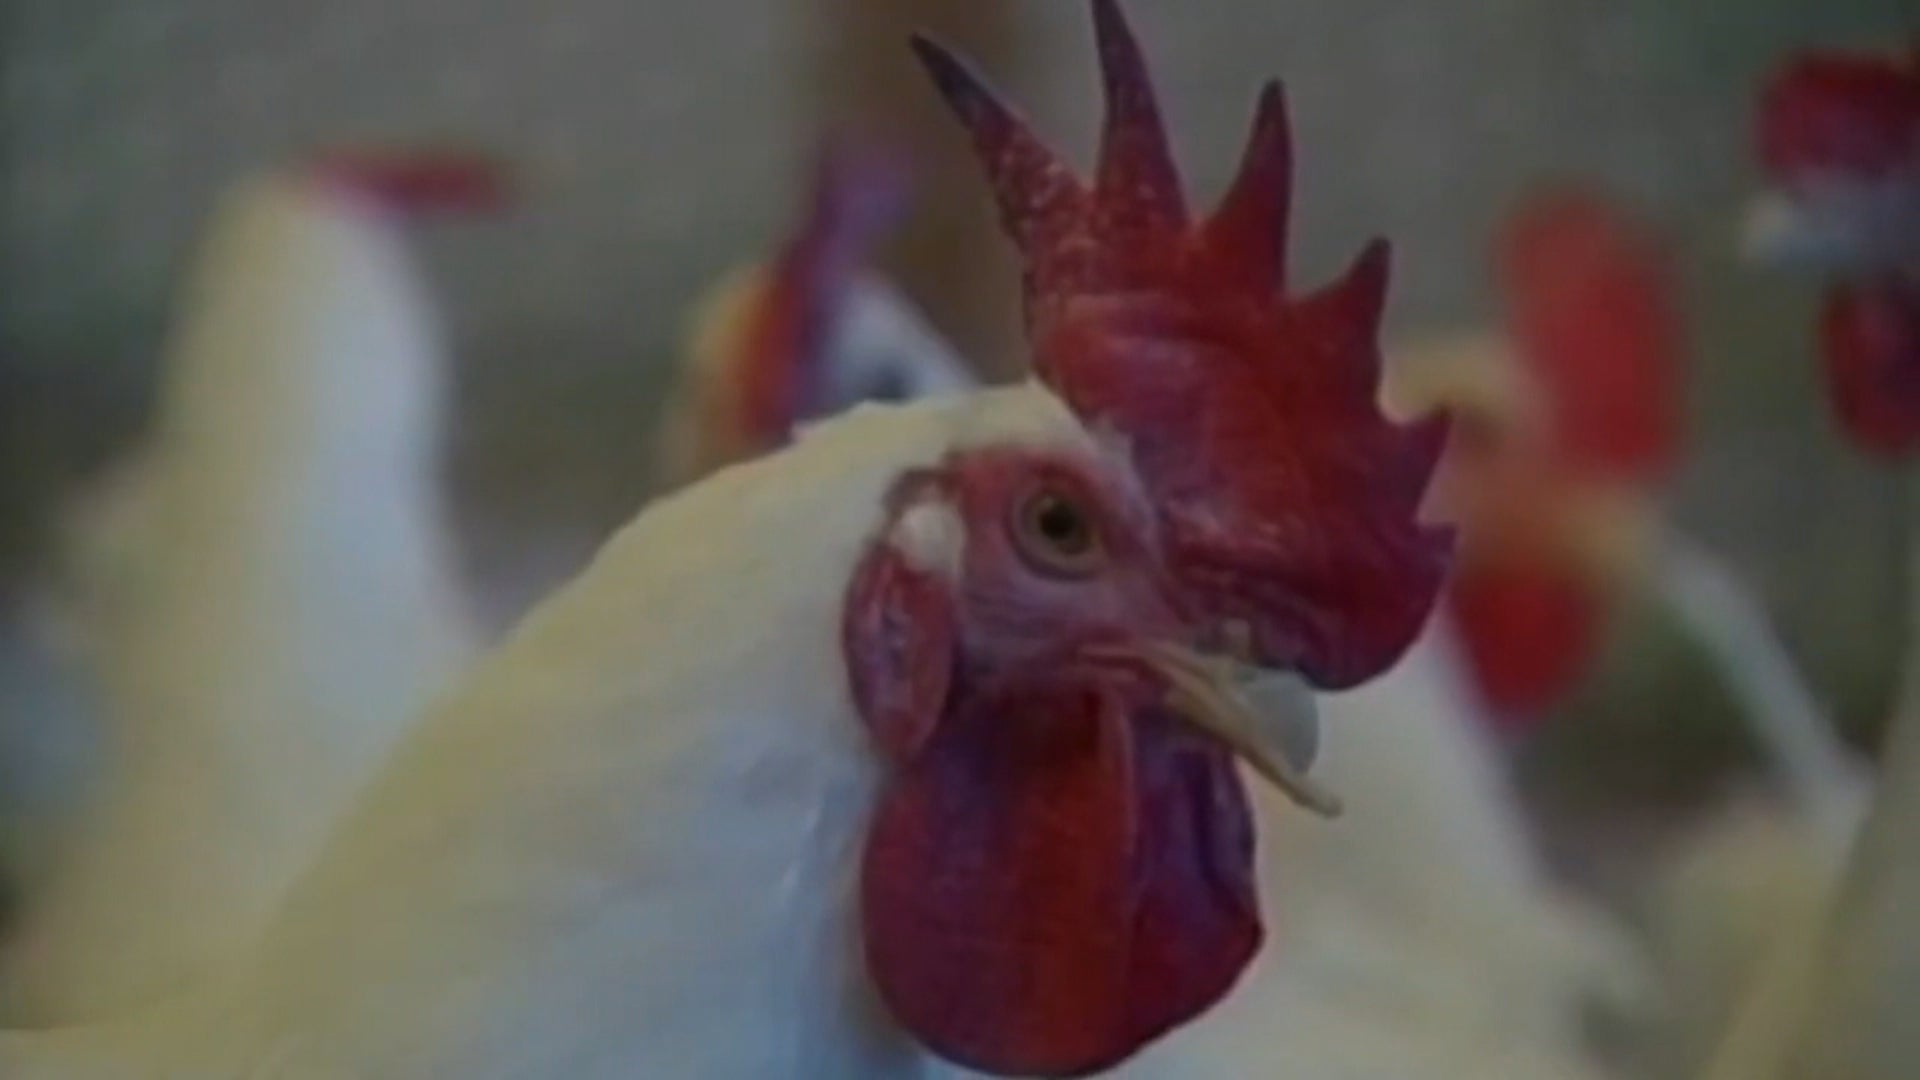 The first case of bird-to-human transmission of bird flu was questioned-WISH-TV | Indianapolis News | Indiana Weather